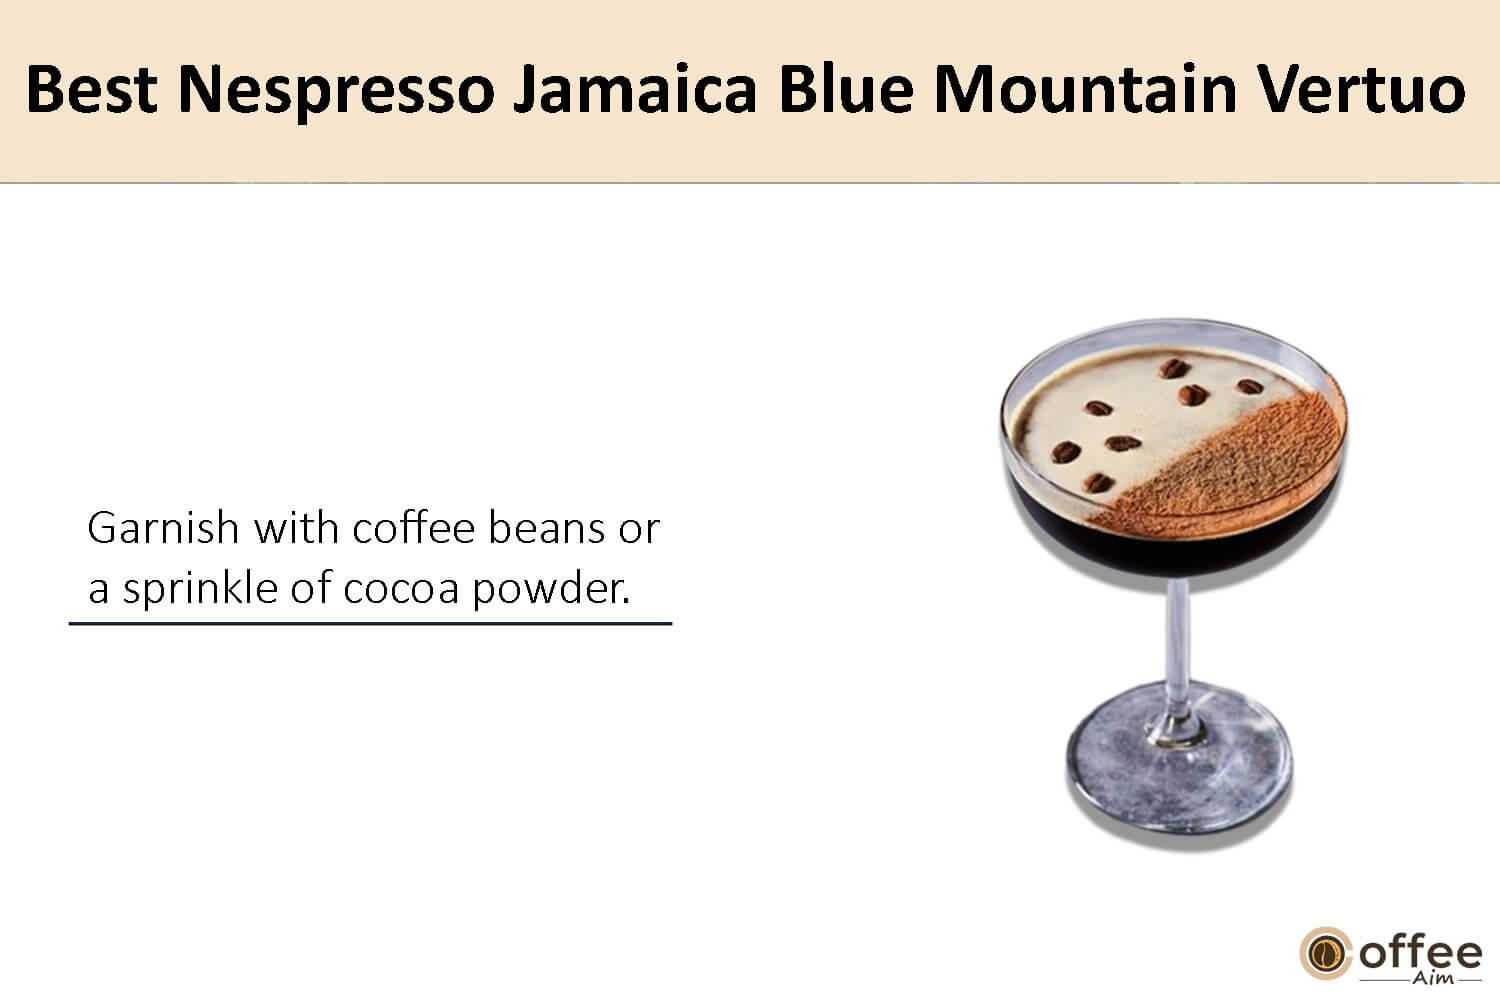 In this image, I elucidate the preparation instructions for crafting the finest Nespresso Jamaica Blue Mountain Vertuo coffee pod.